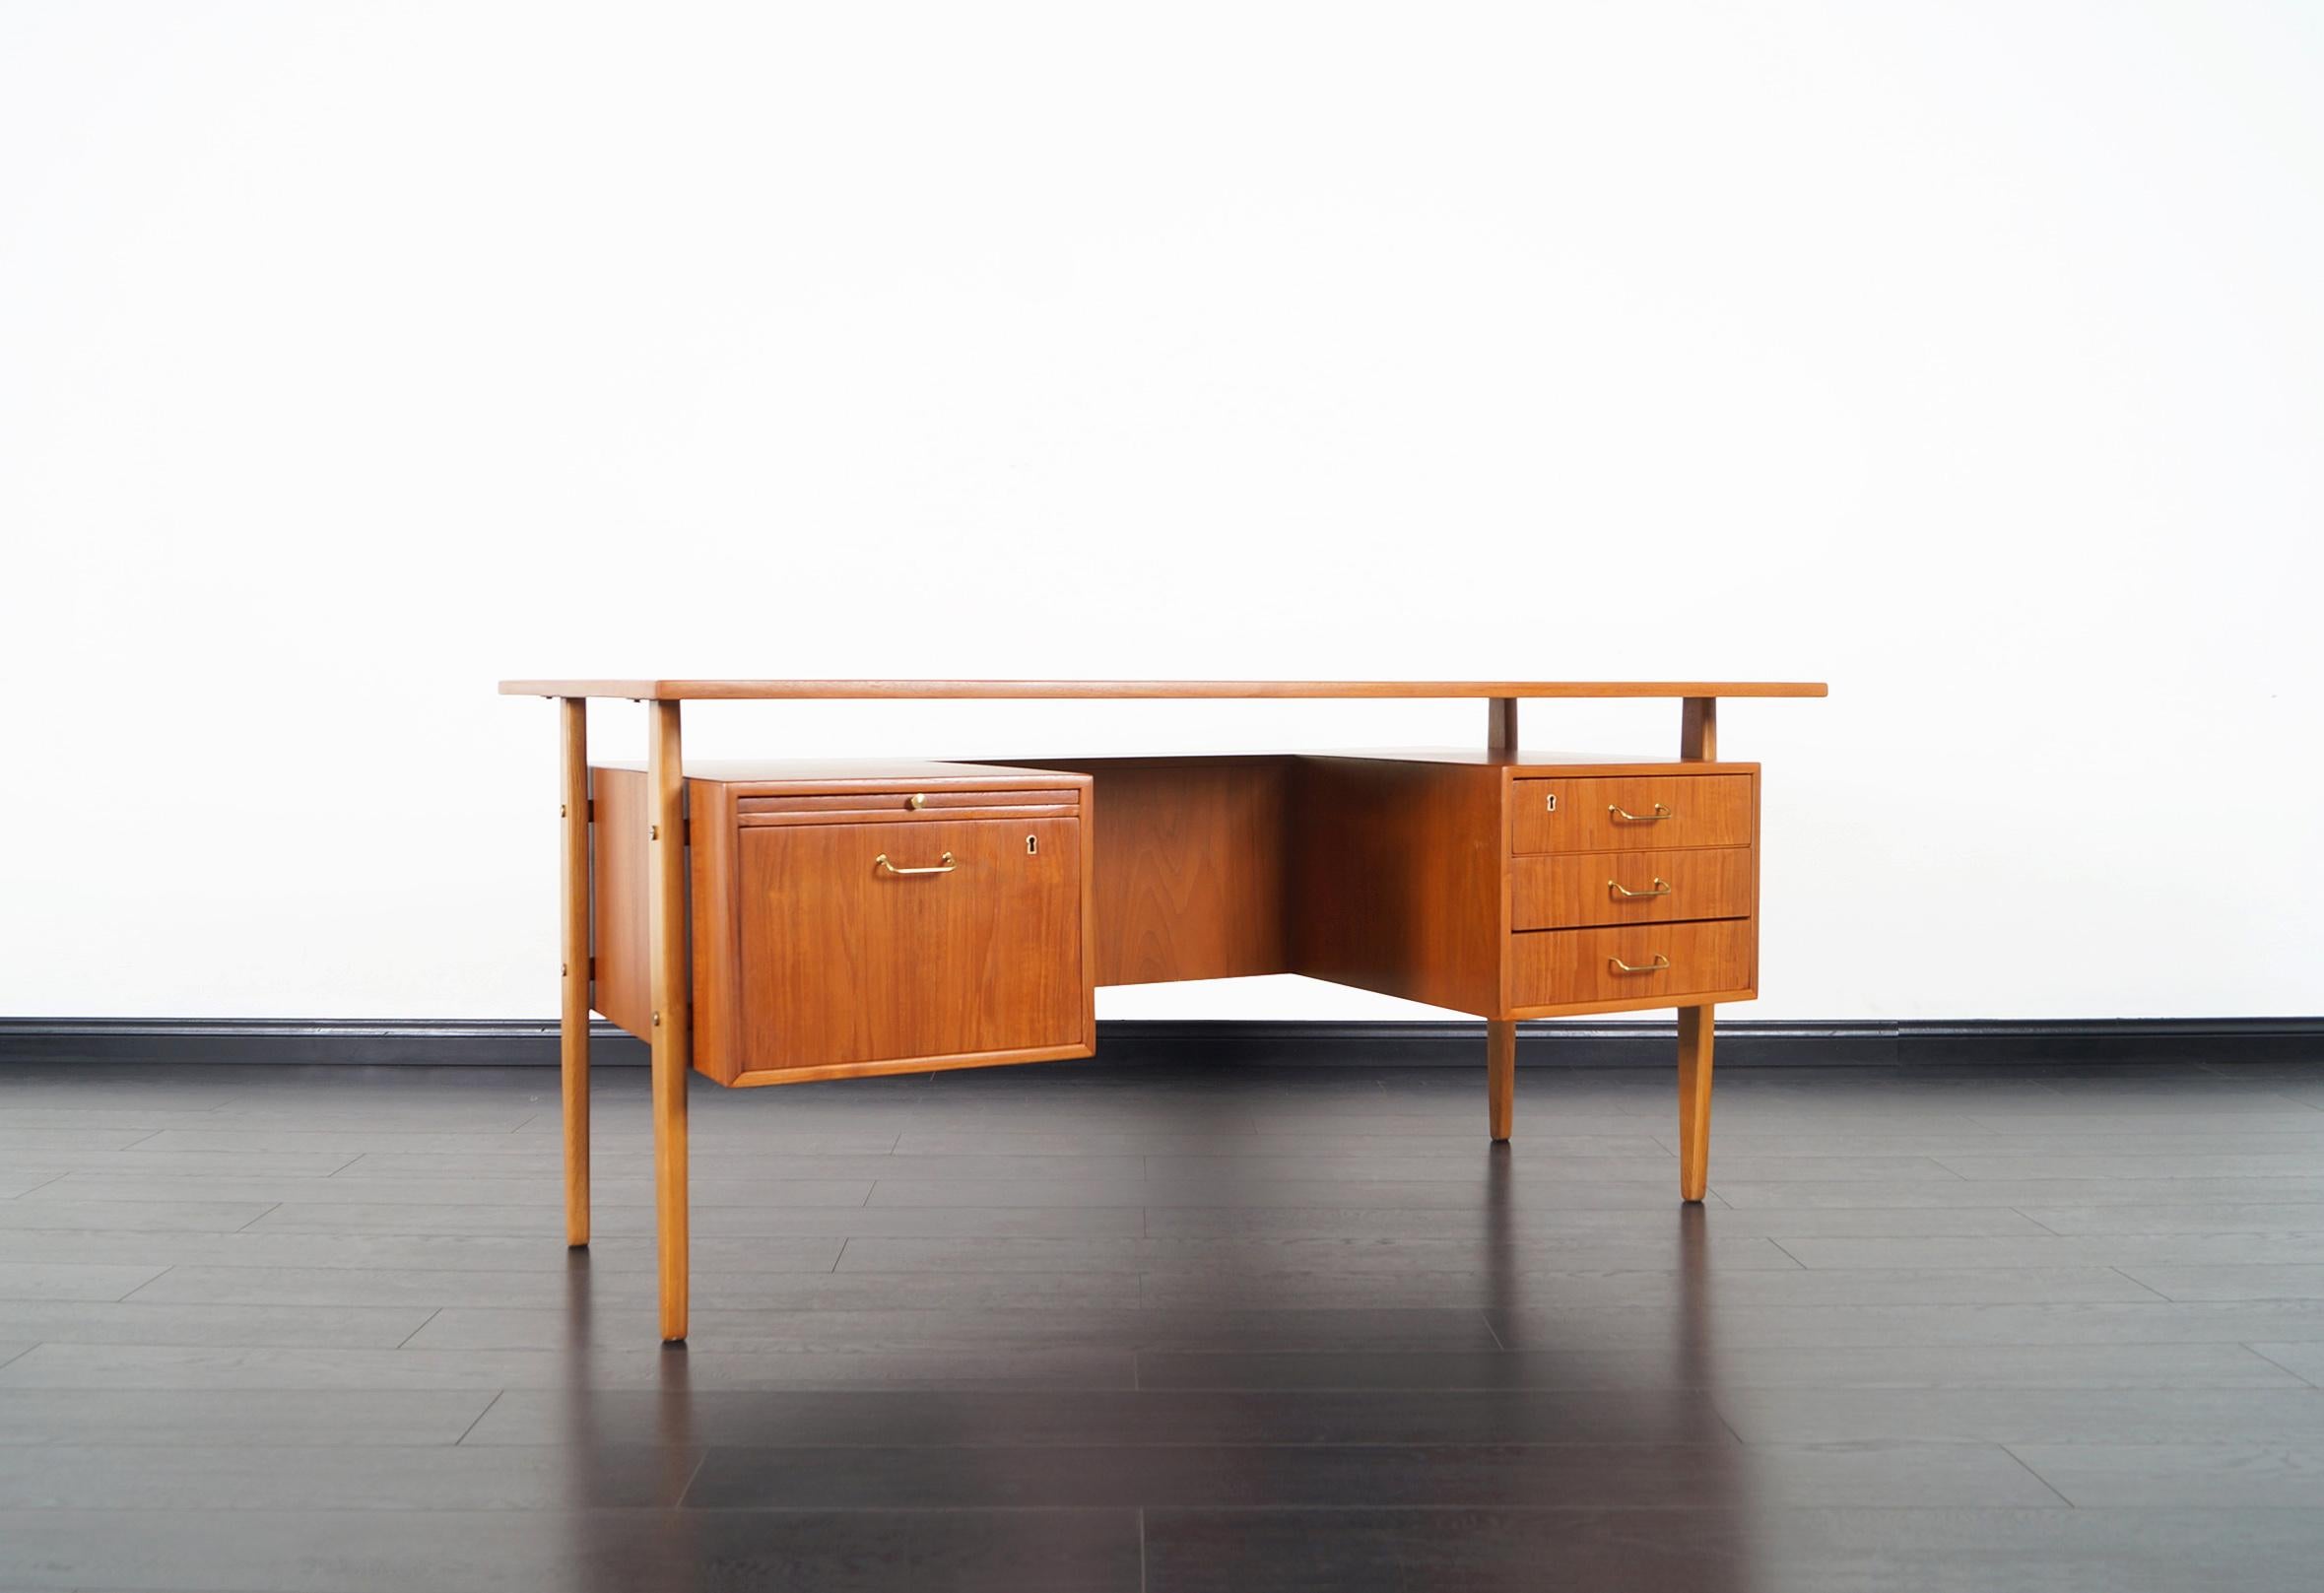 Amazing Danish modern teak desk designed by Torben Standgaard for Falster Møbelfabrik. This freestanding desk features a floating top design. Includes three drawers on the right side and a file drawer with pull-out writing surface on the left side.